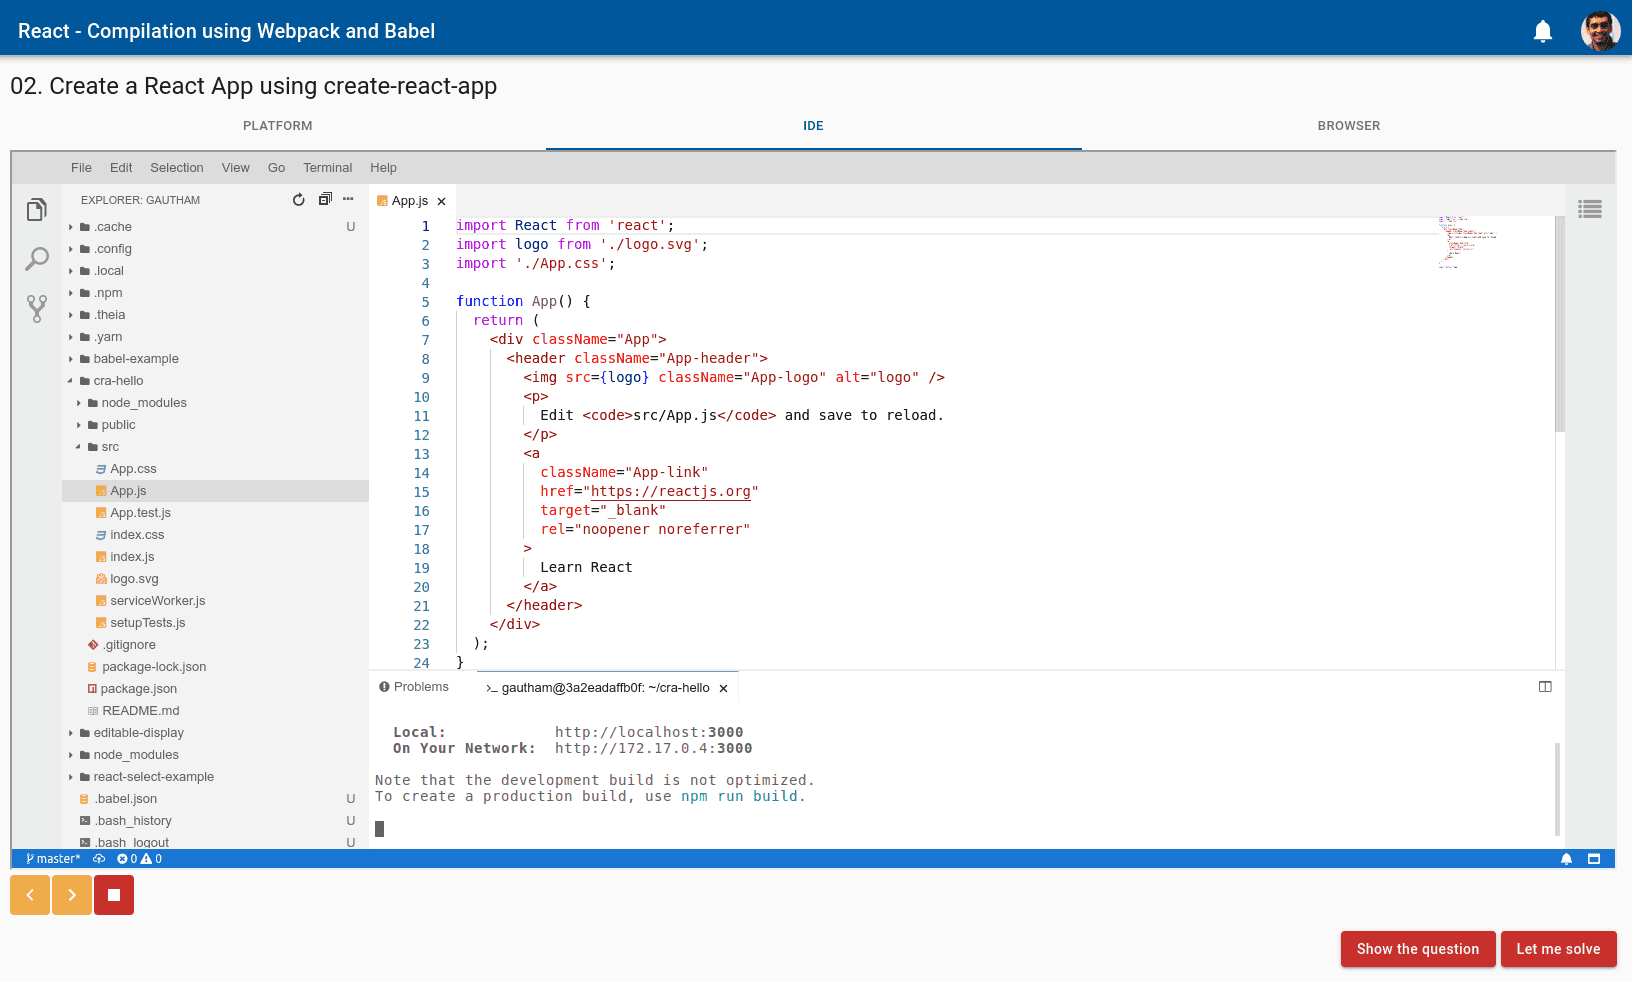 IDE in the Browser